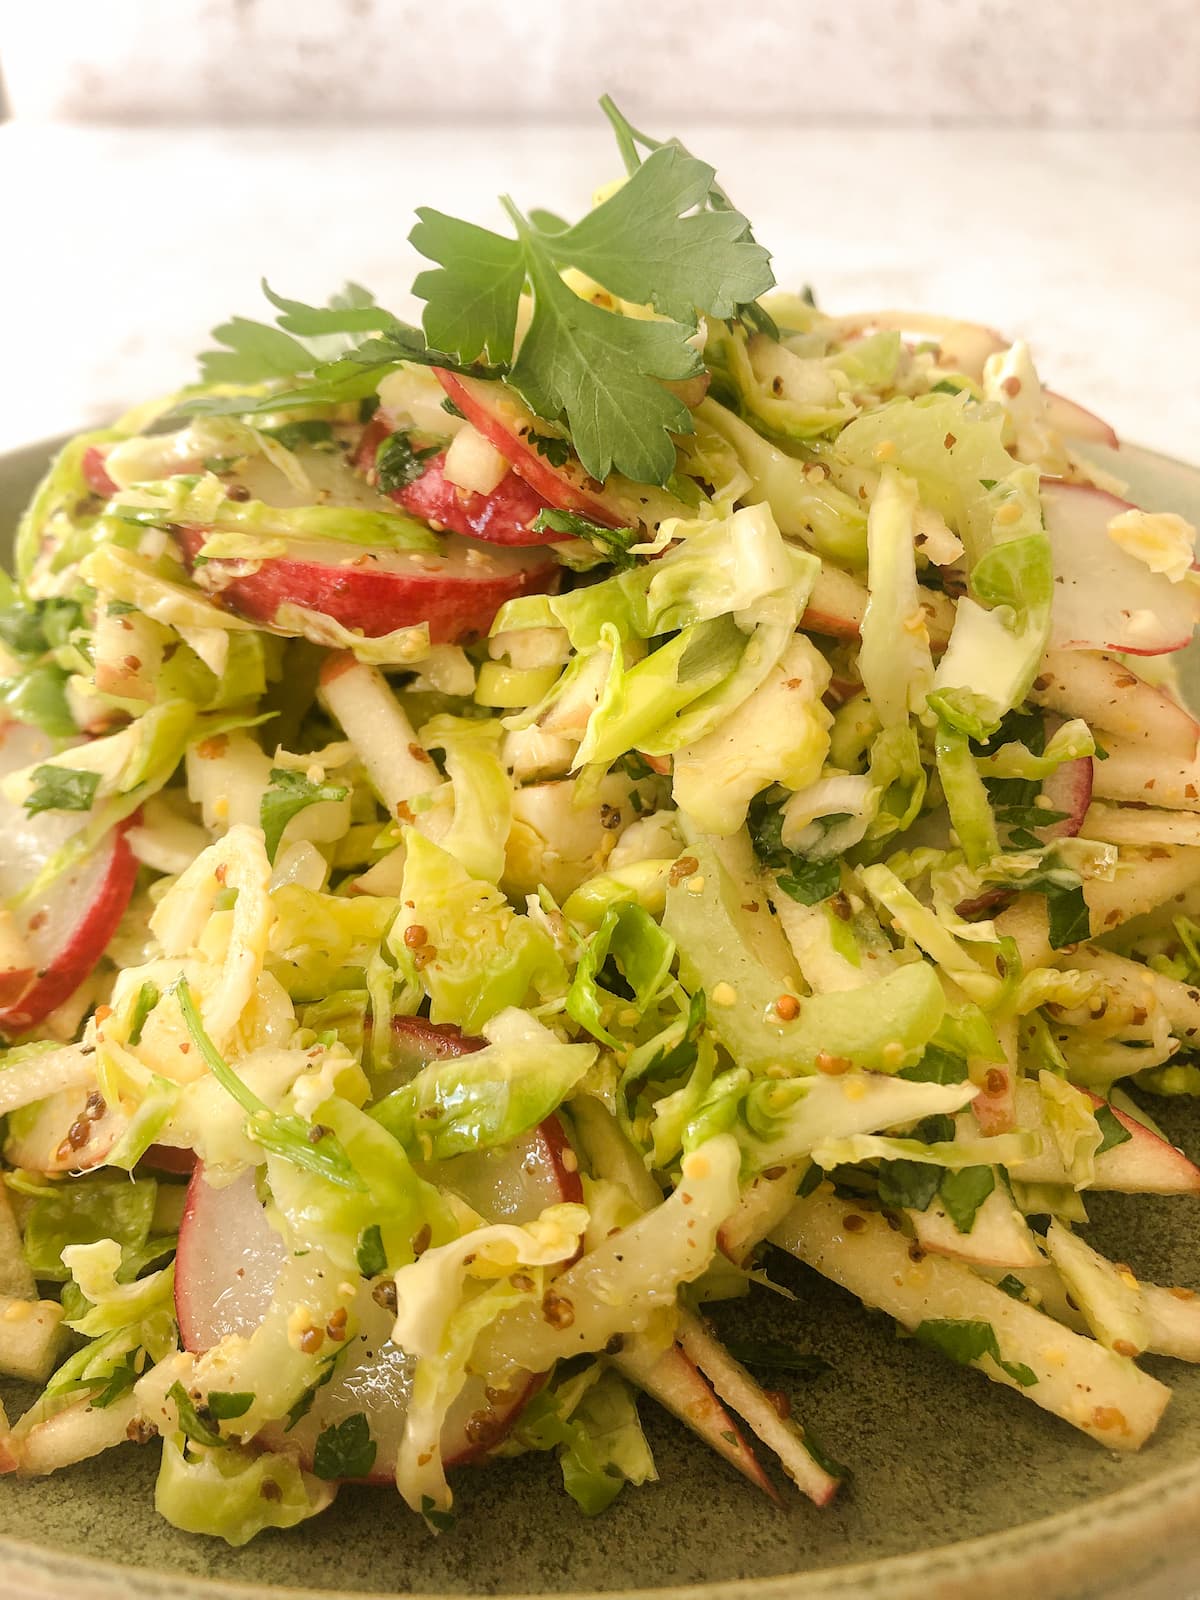 A green bowl filled with dressed shredded Brussels sprouts, red apple, celery and sliced radish, garnished with parsley.